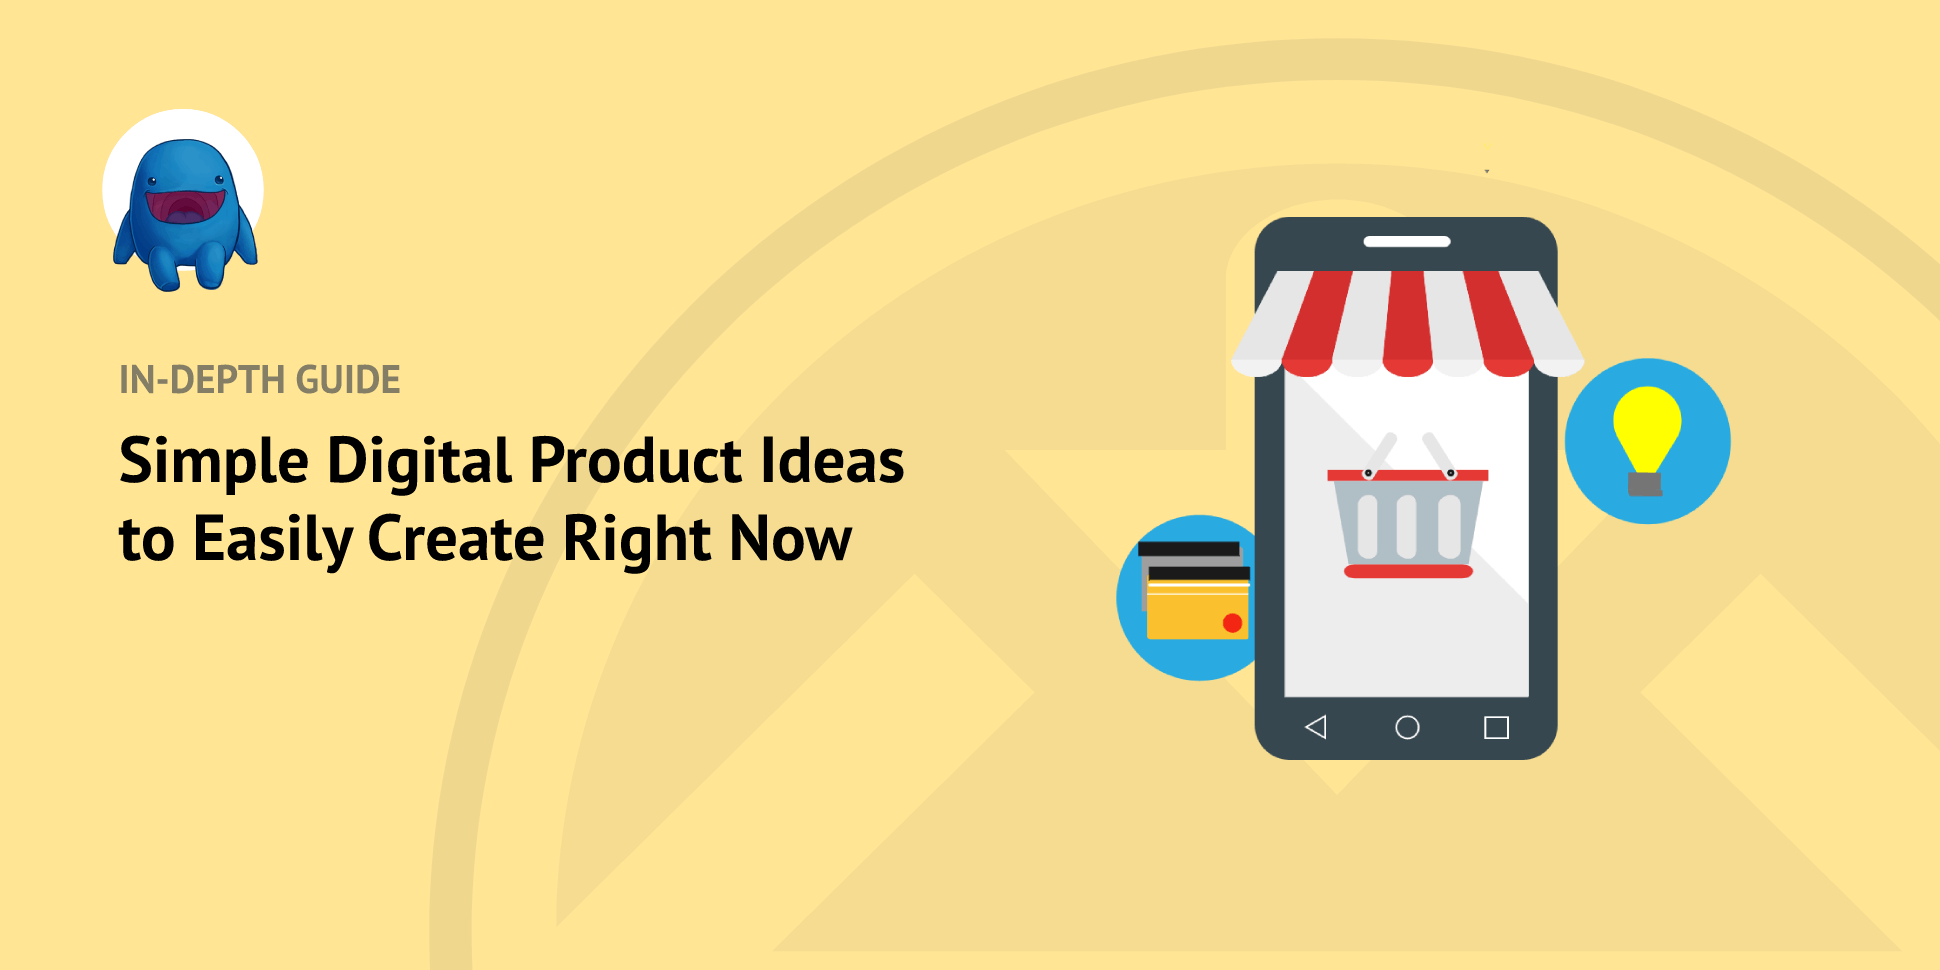 Simple Digital Product Ideas to Easily Create Right Now